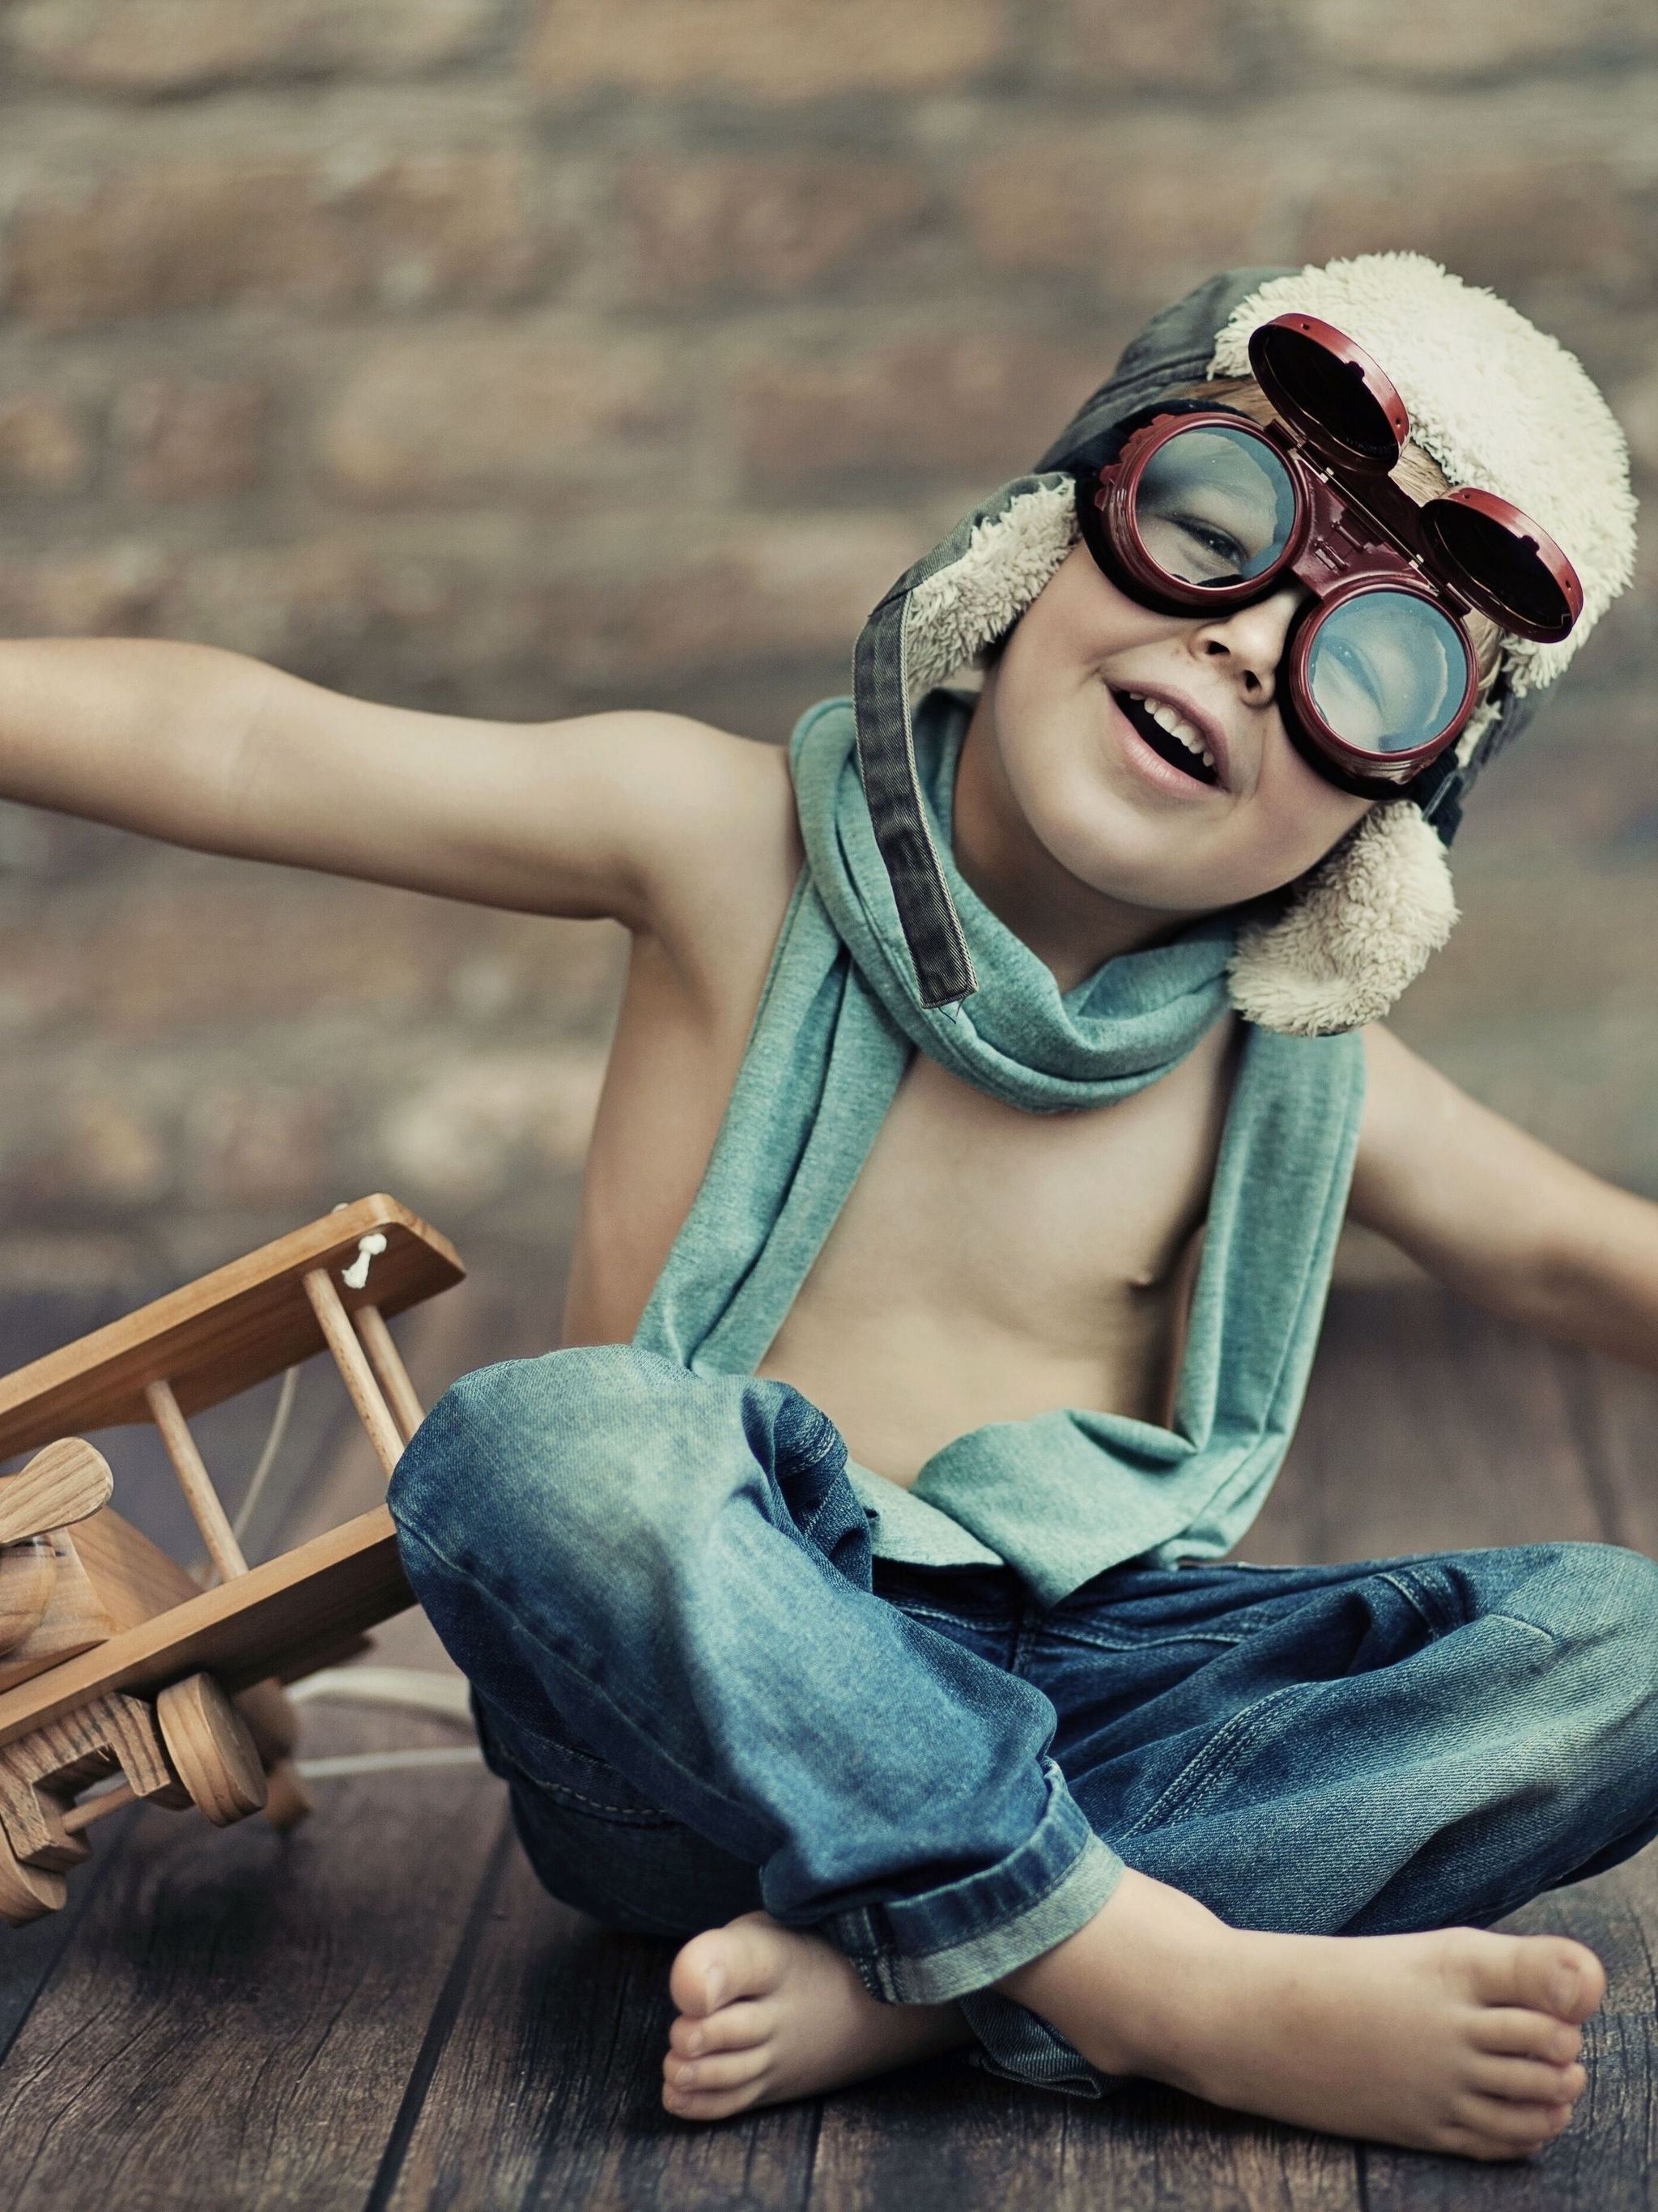 Image: Boy, game, helicopter, toy, sunglasses, hat